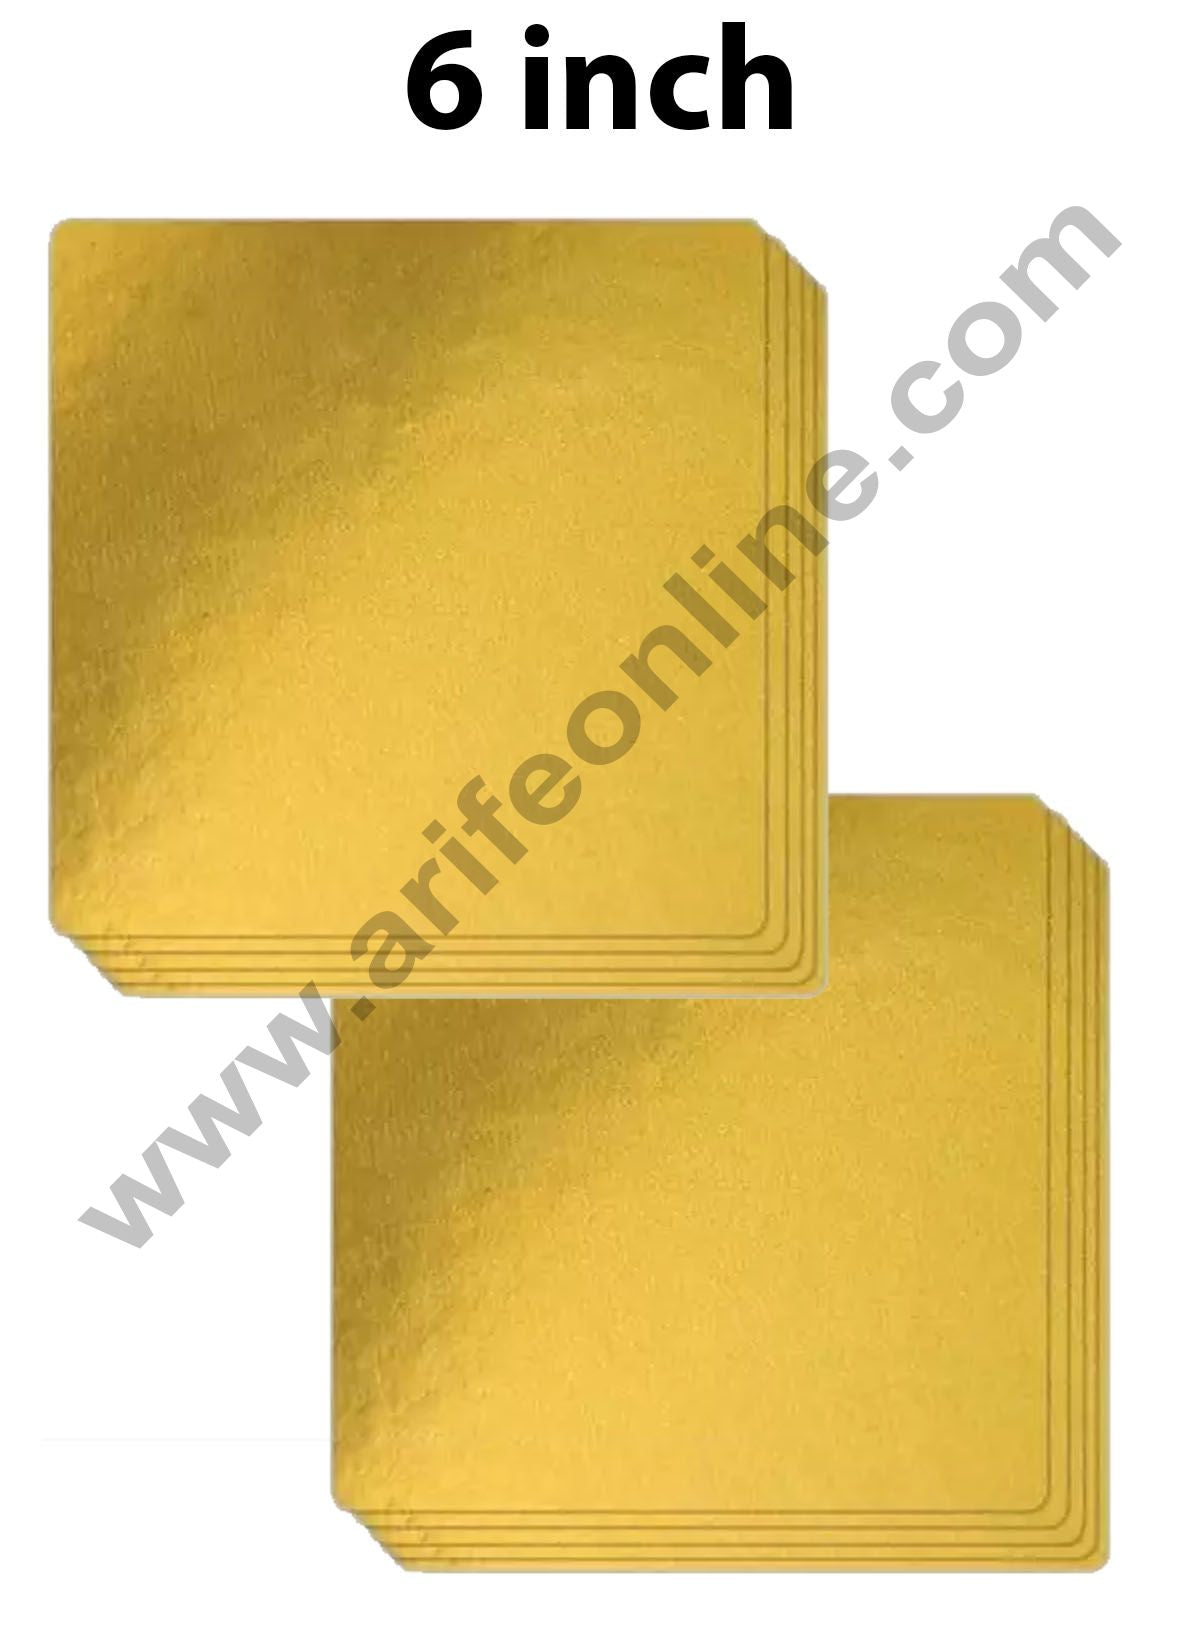 10 inch / 25.5cm GOLD SQUARE cake drum thick board - from only 89p